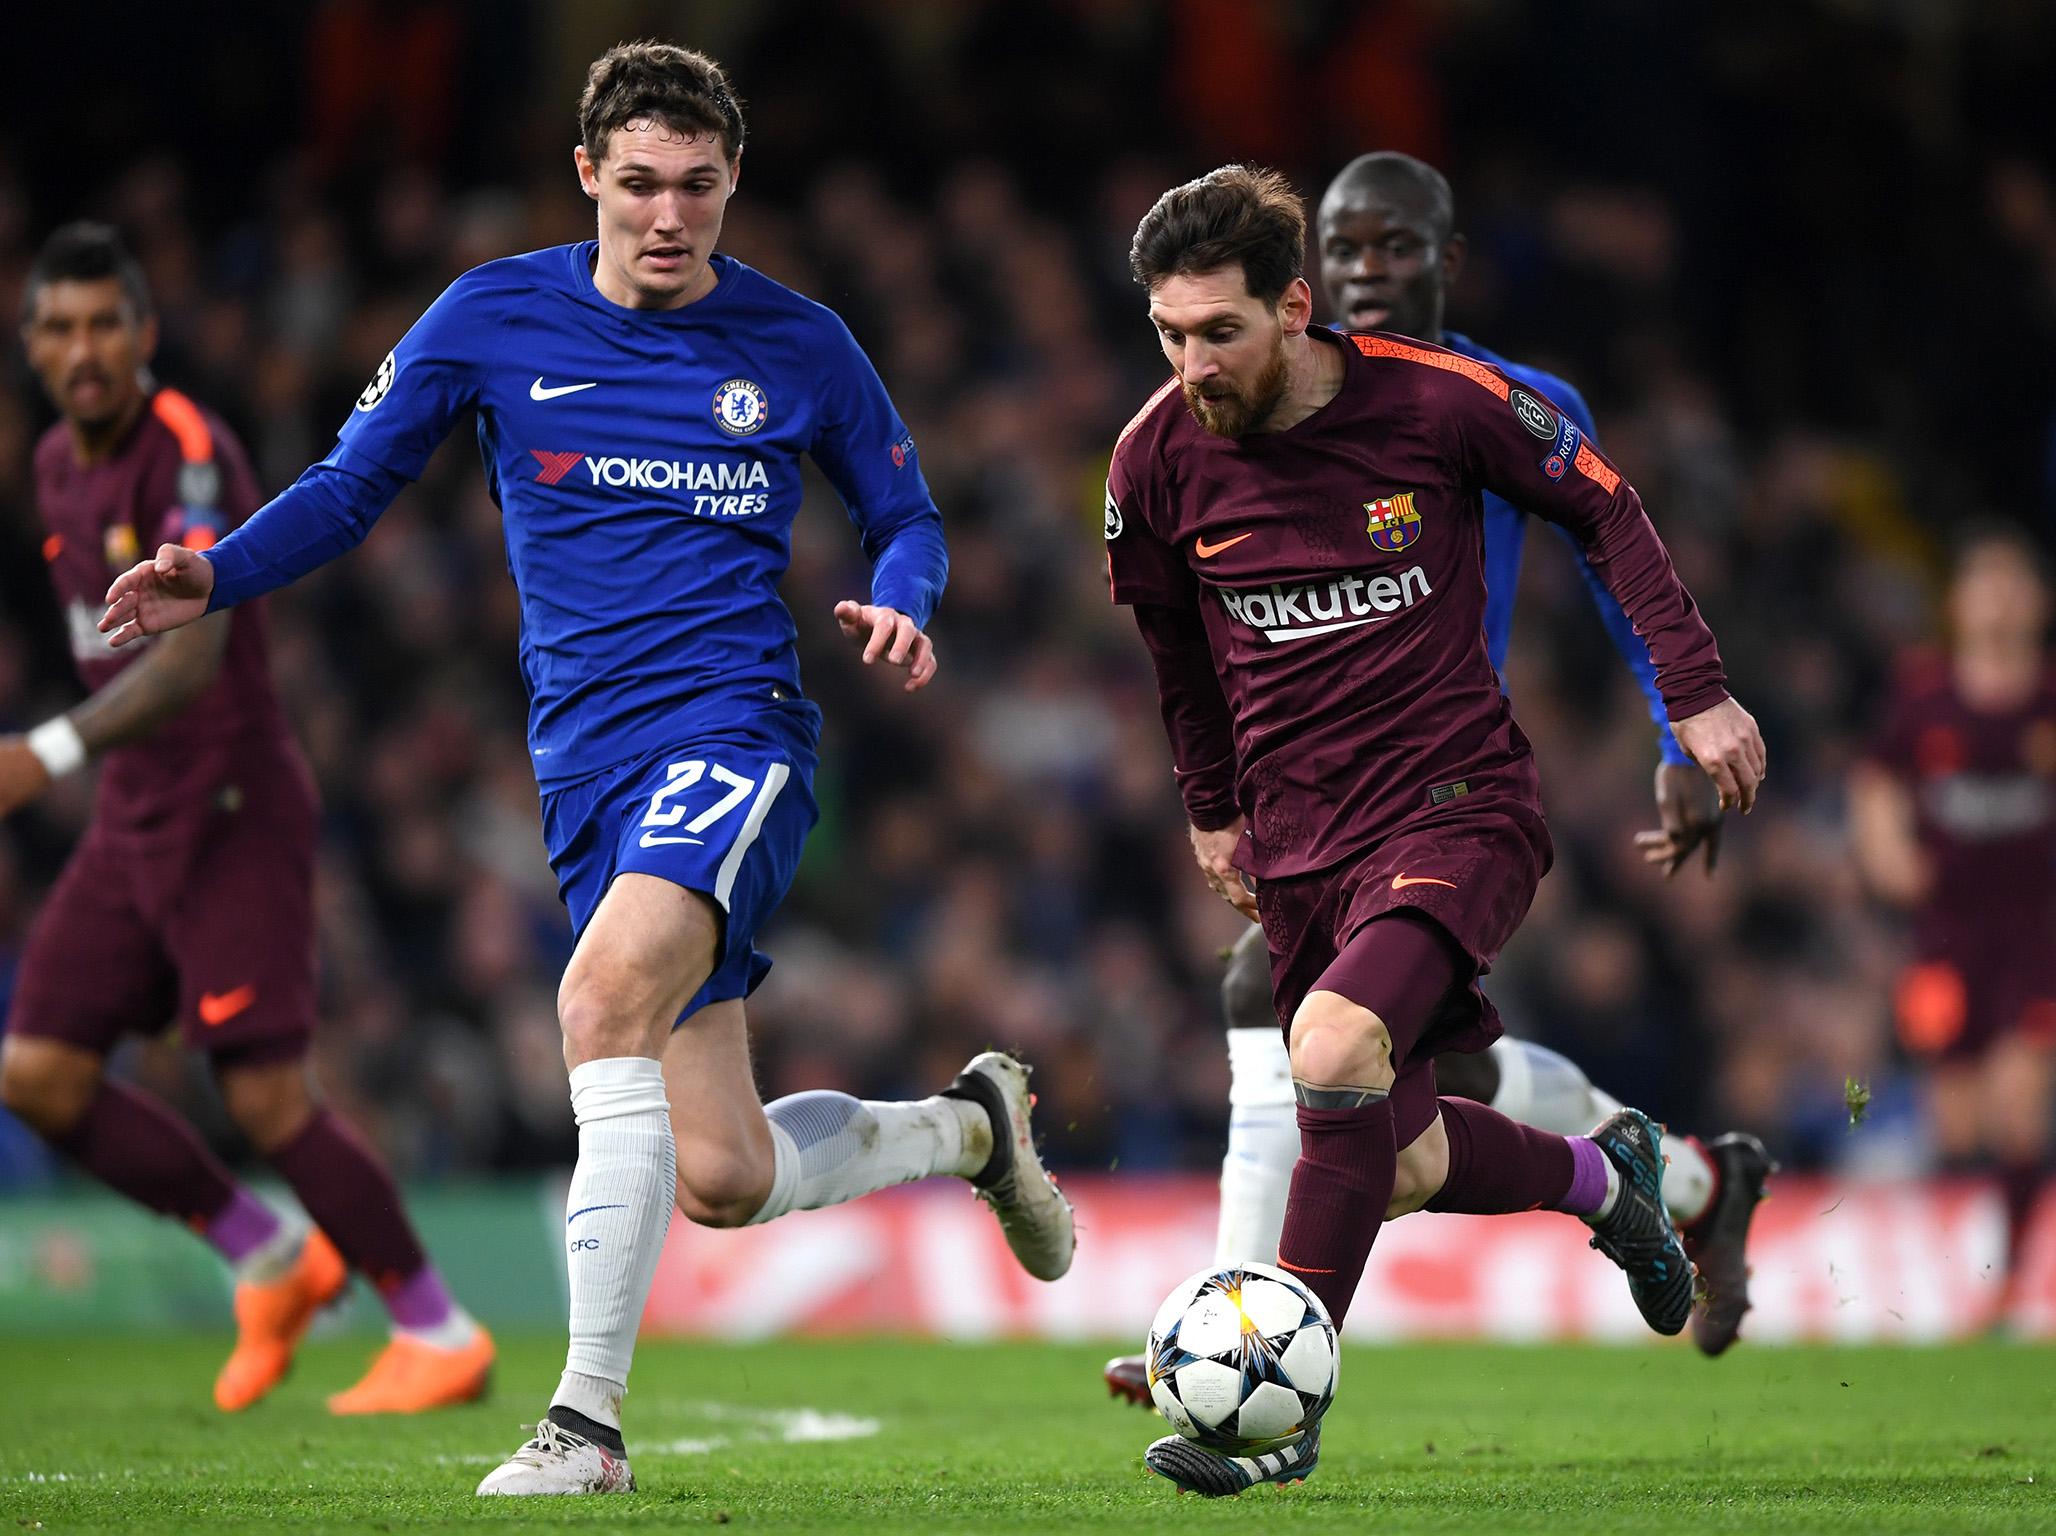 Chelsea shackled Lionel Messi well until Andreas Christensen's error